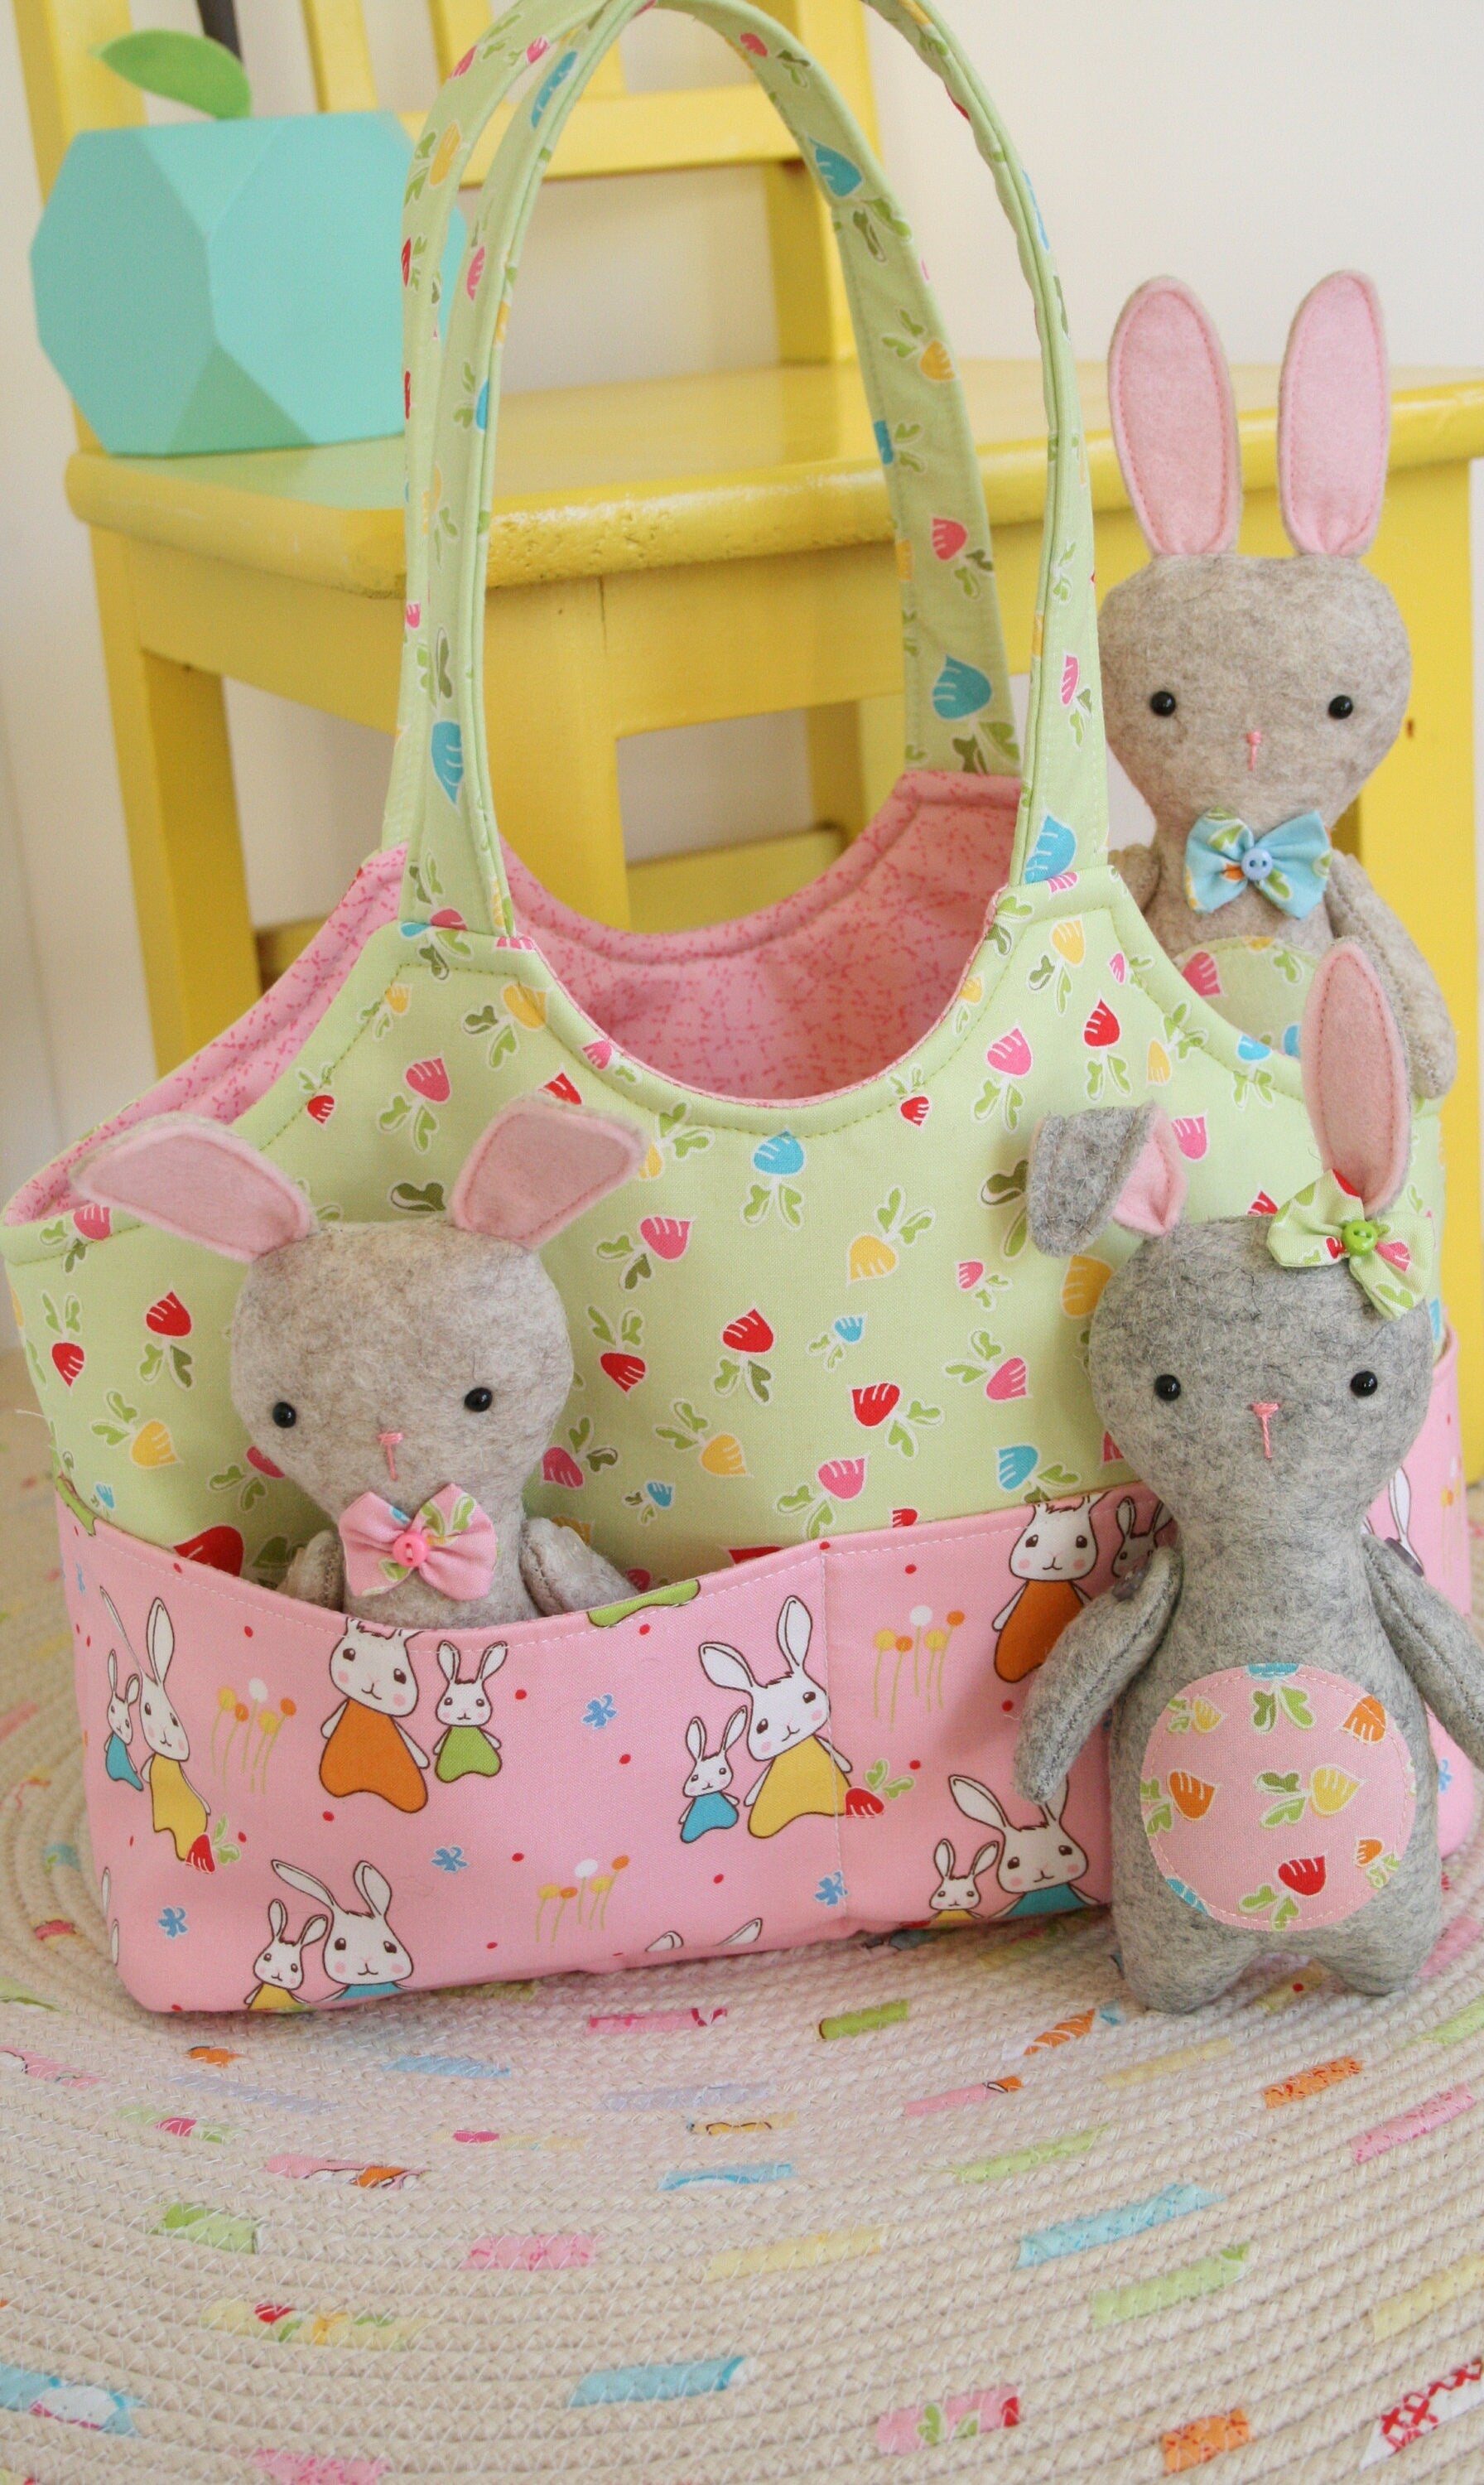 sewing pattern for small bag with outside pockets and felt bunnies.